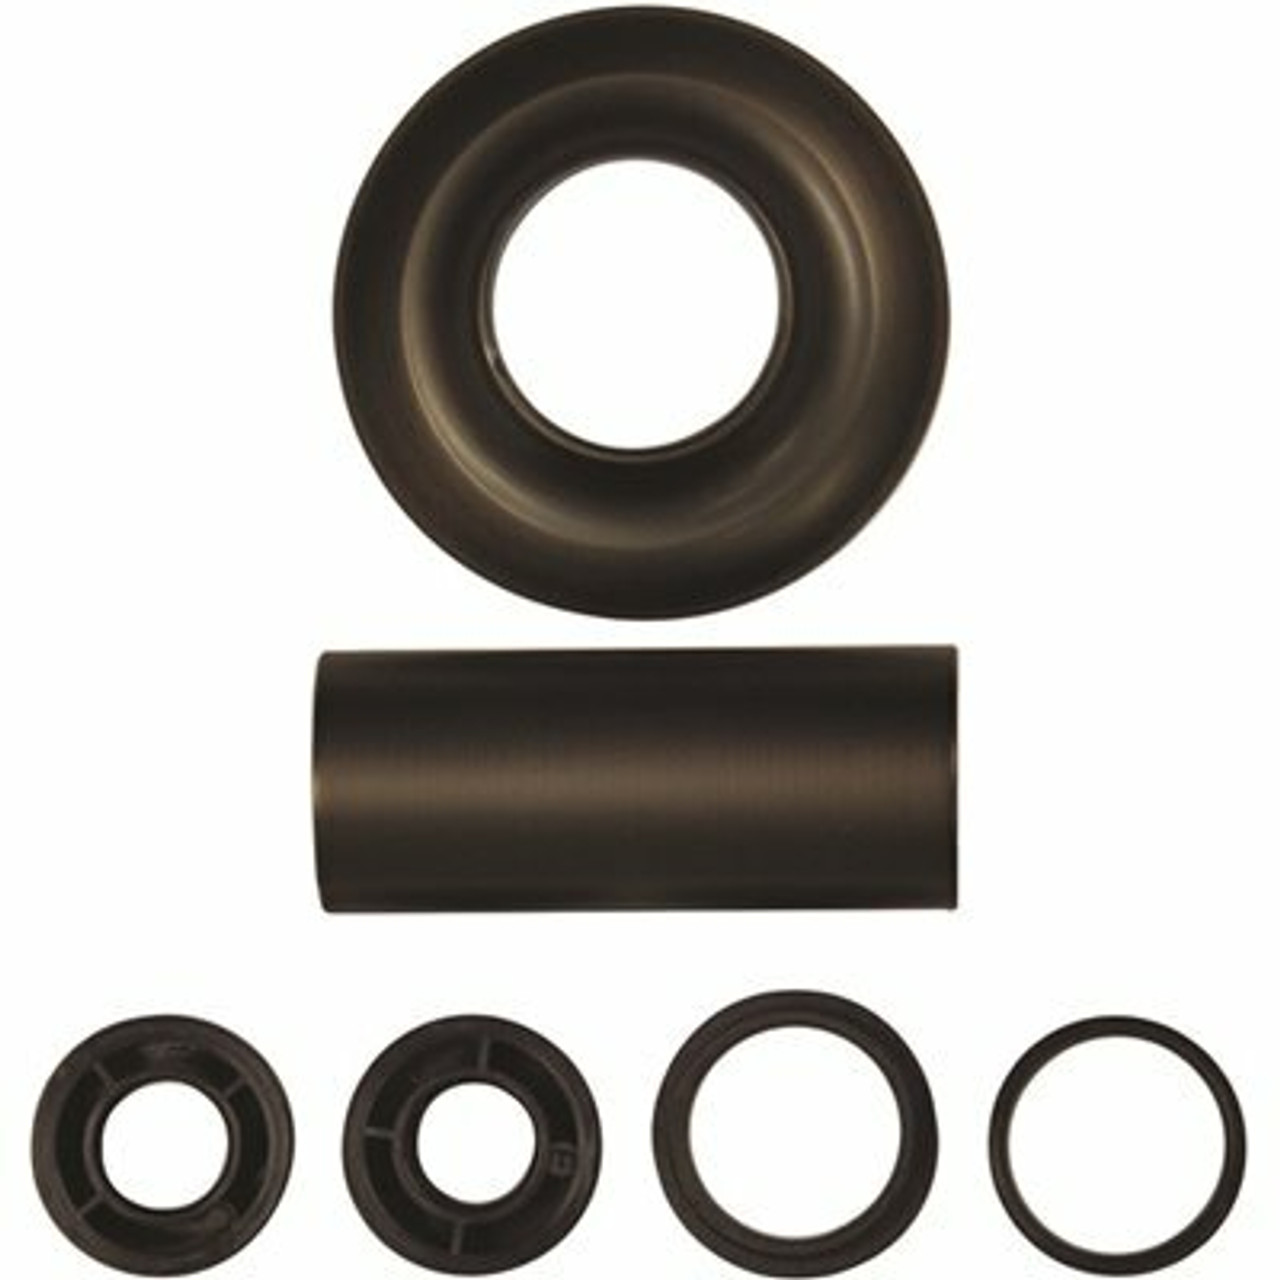 Danco 3 In. O.D. X 1-1/4 In. I.D. Tub/Shower Escutcheon And Flange Assembly Set In Oil Rubbed Bronze